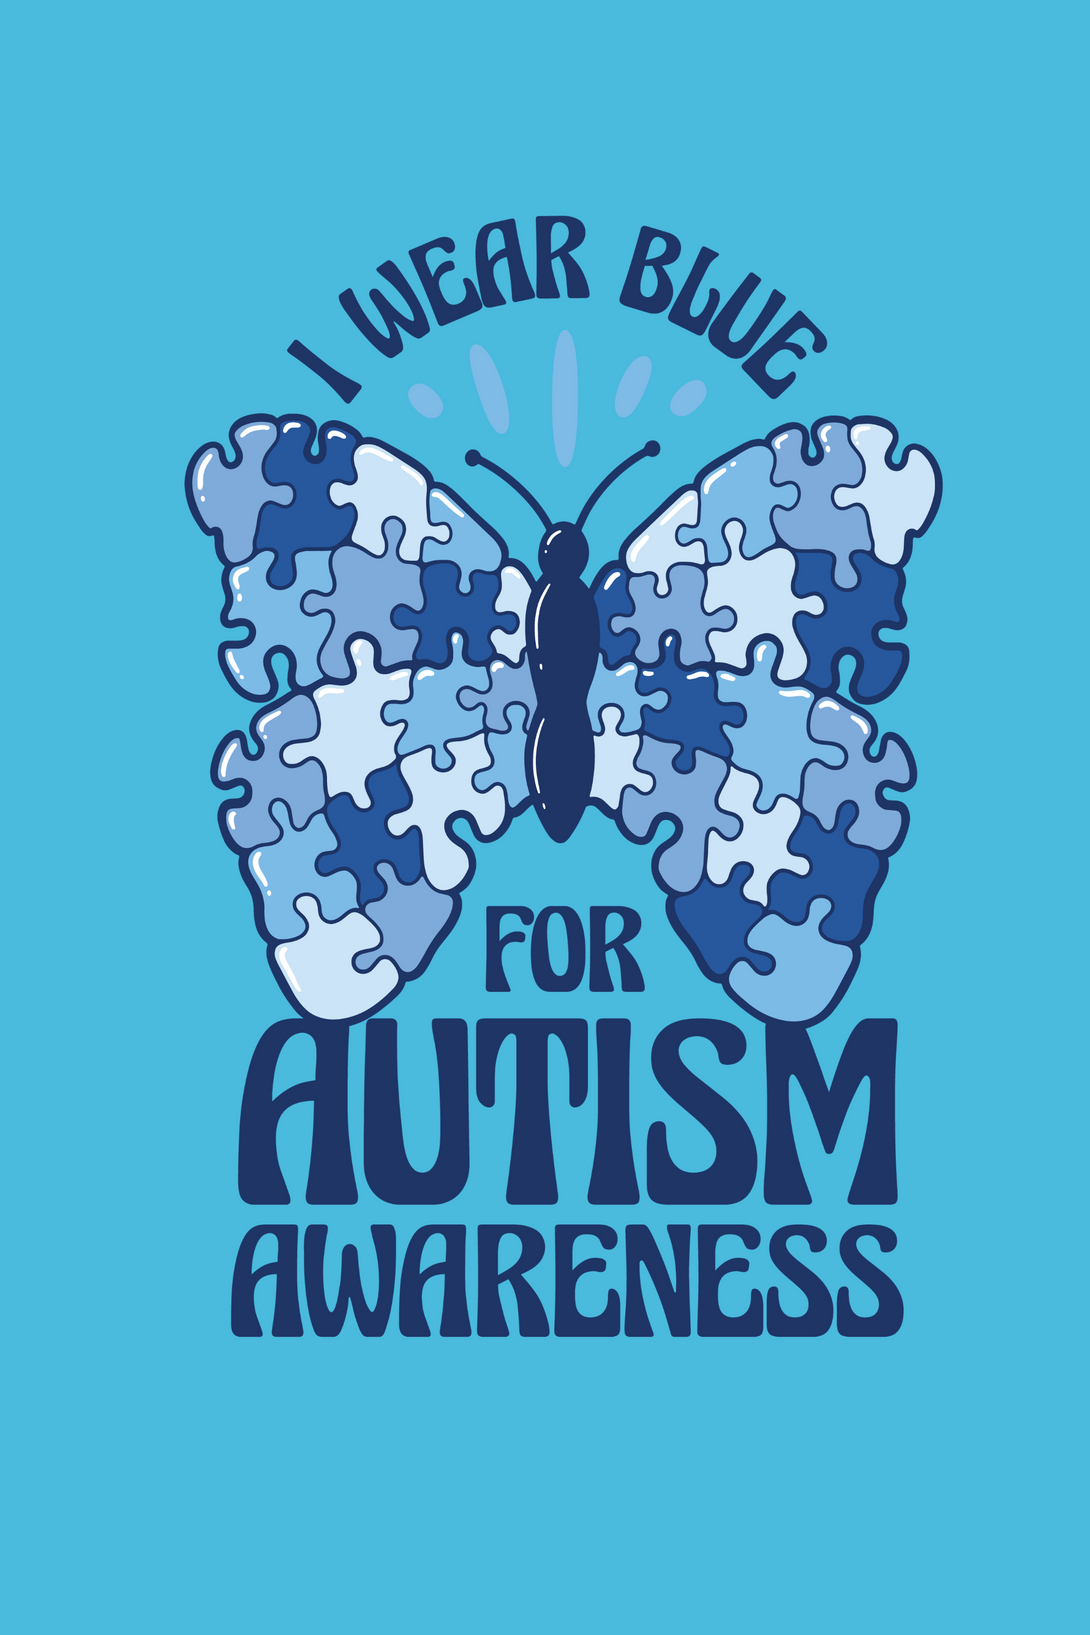 Autism Awareness Puzzle Skyblue Printed T-Shirt For Women - WowWaves - 1